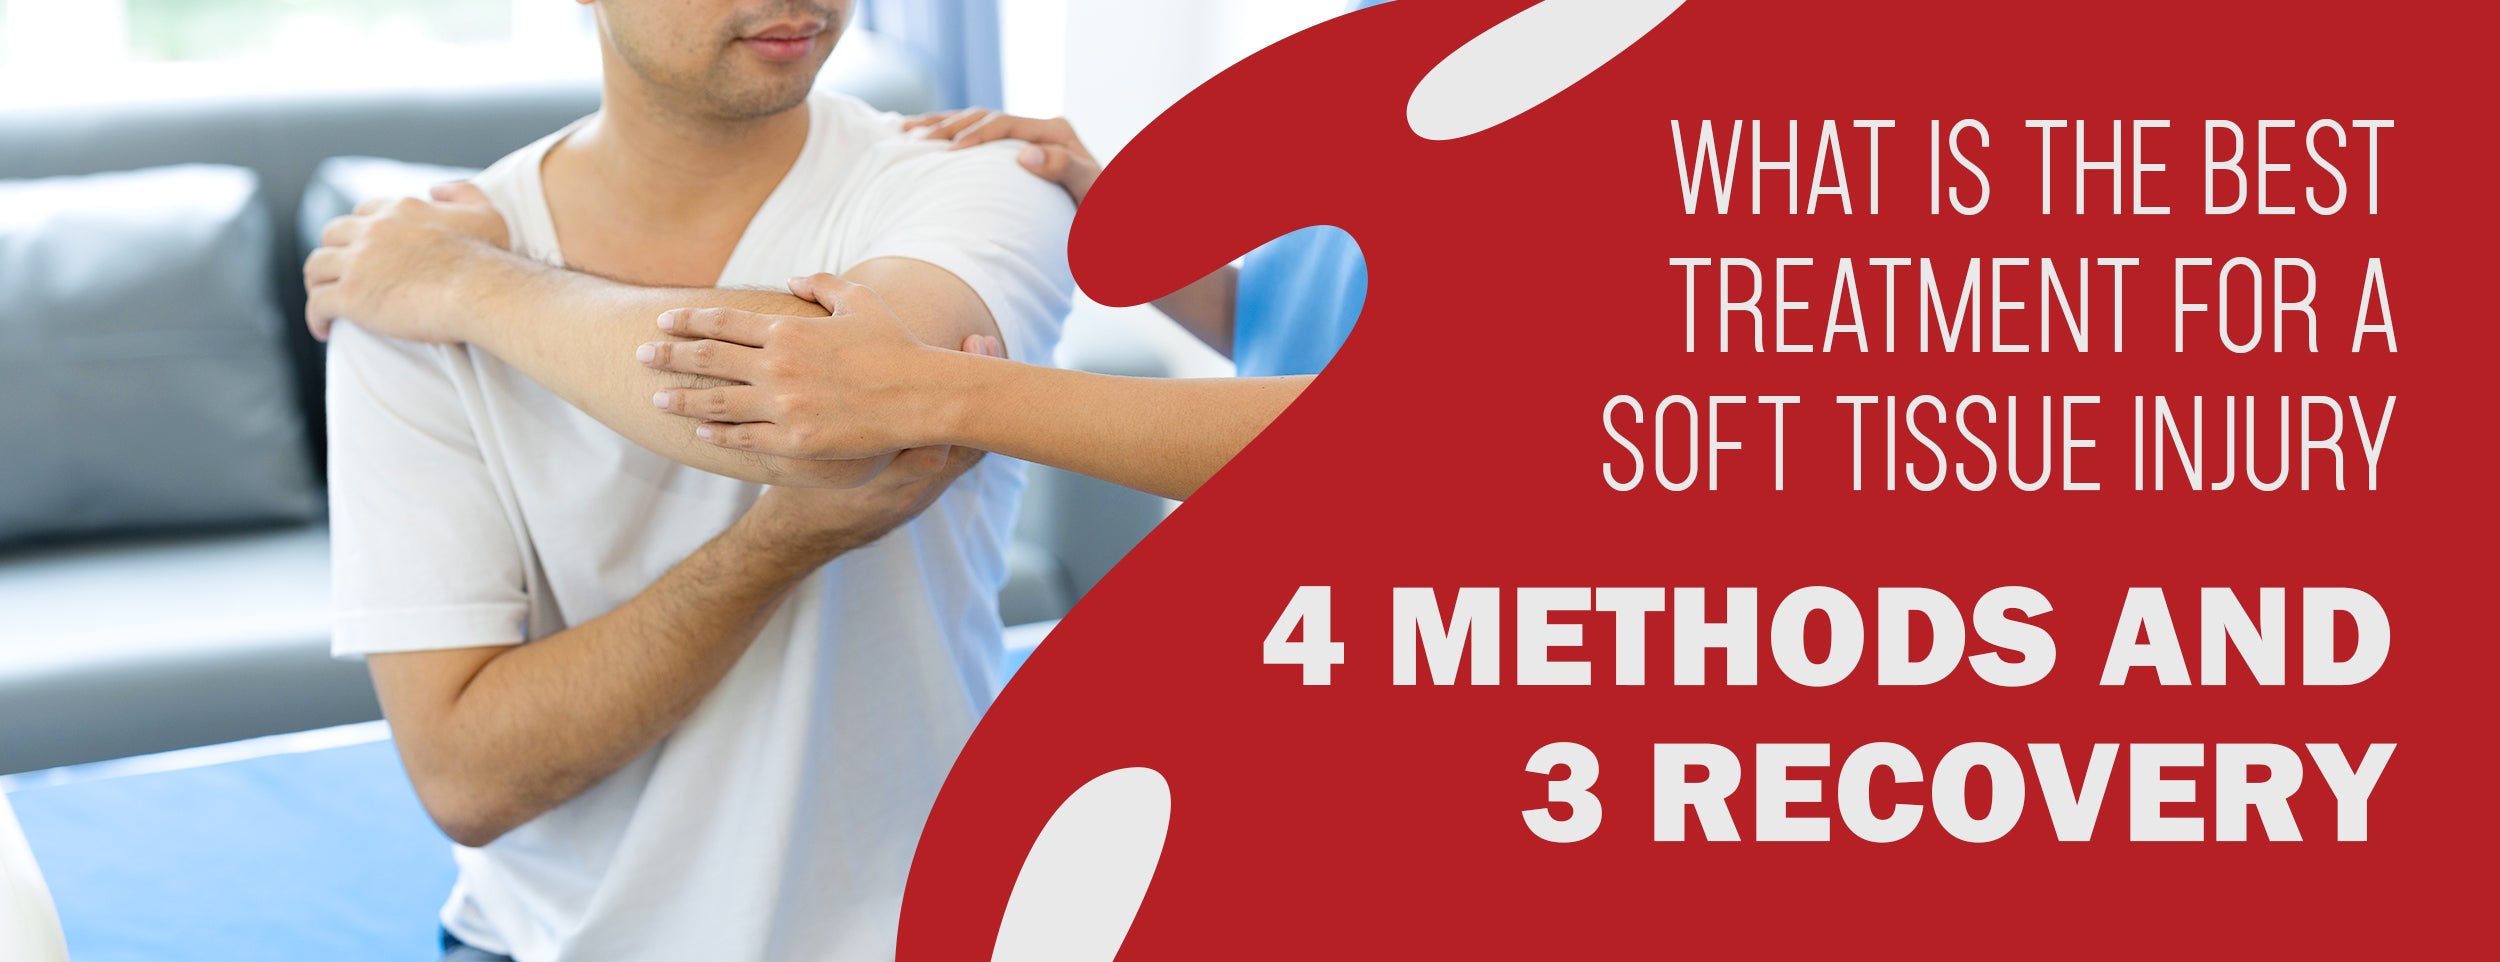 Choosing The Best Treatment For A Soft Tissue Injury: 12 Best Methods